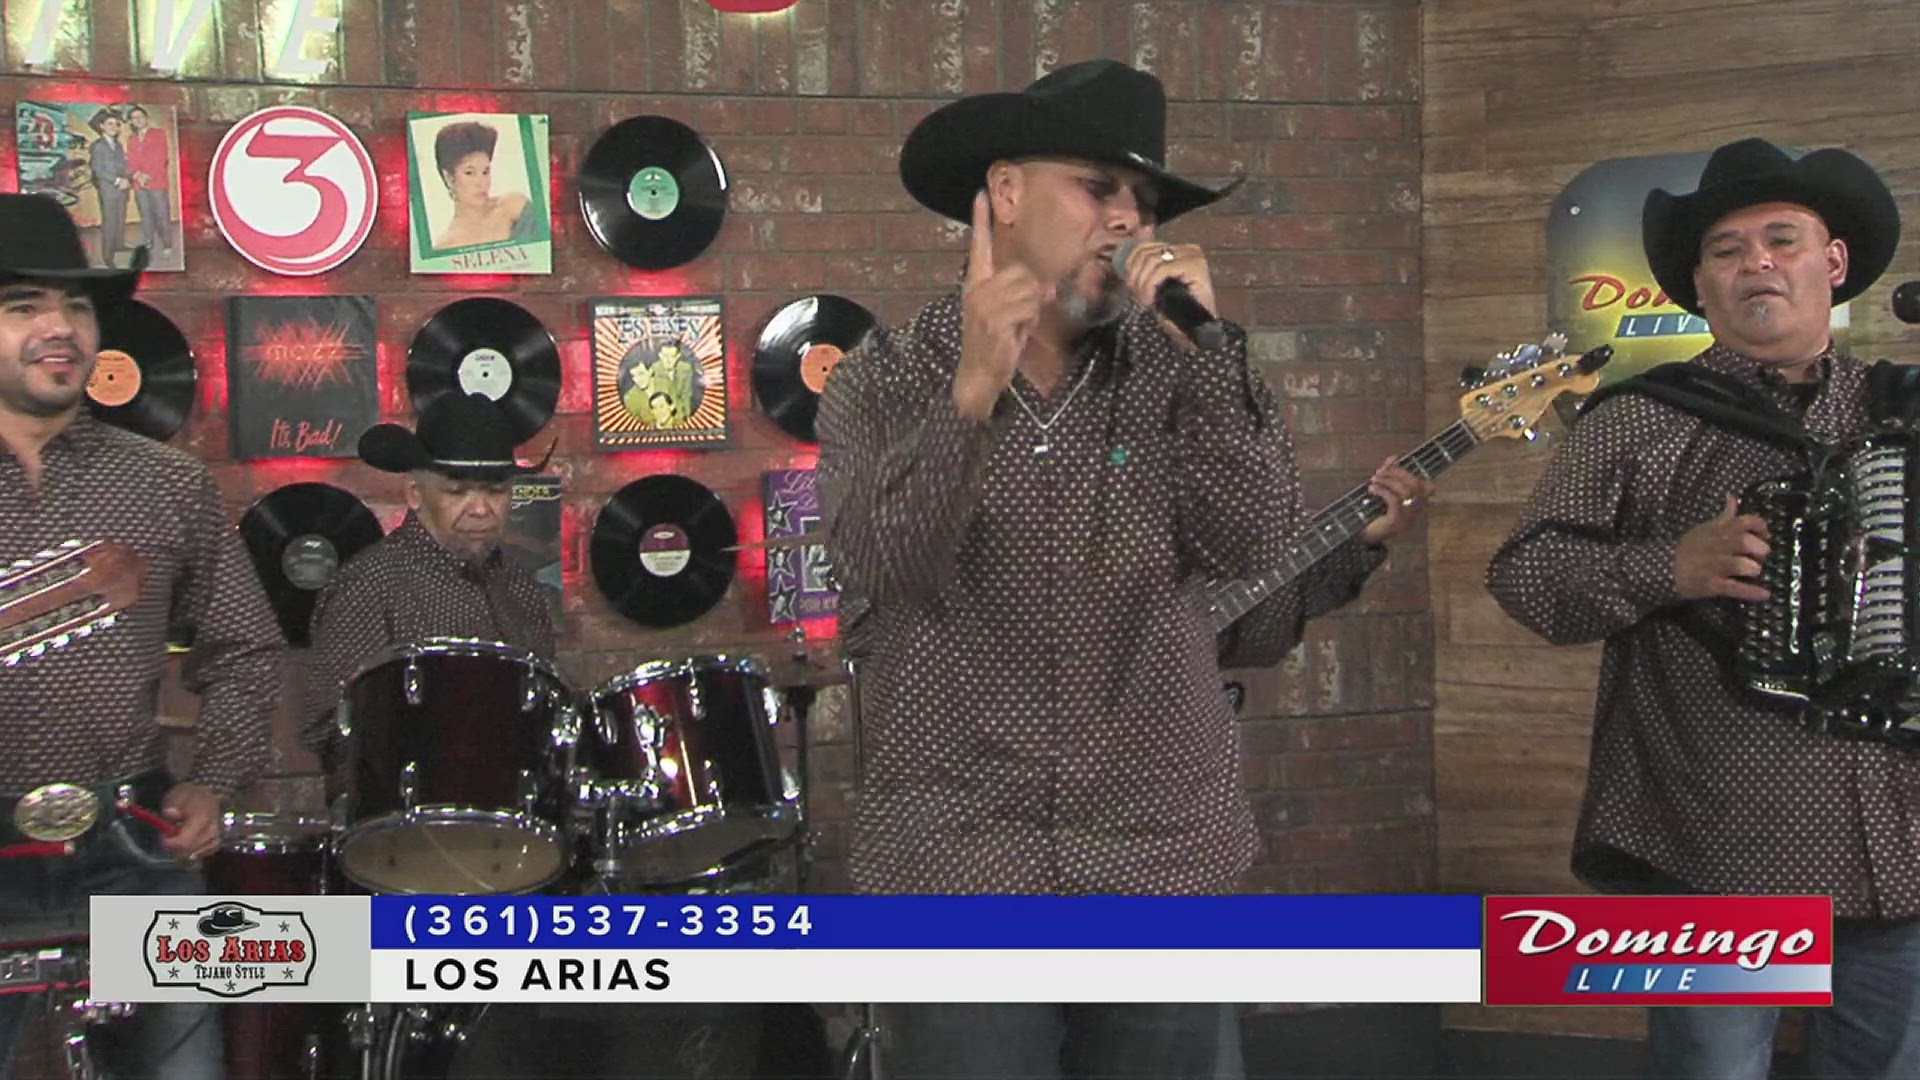 Robstown-based Tejano group Los Arias joined us on Domingo Live to perform their new song "Solo Hablé."